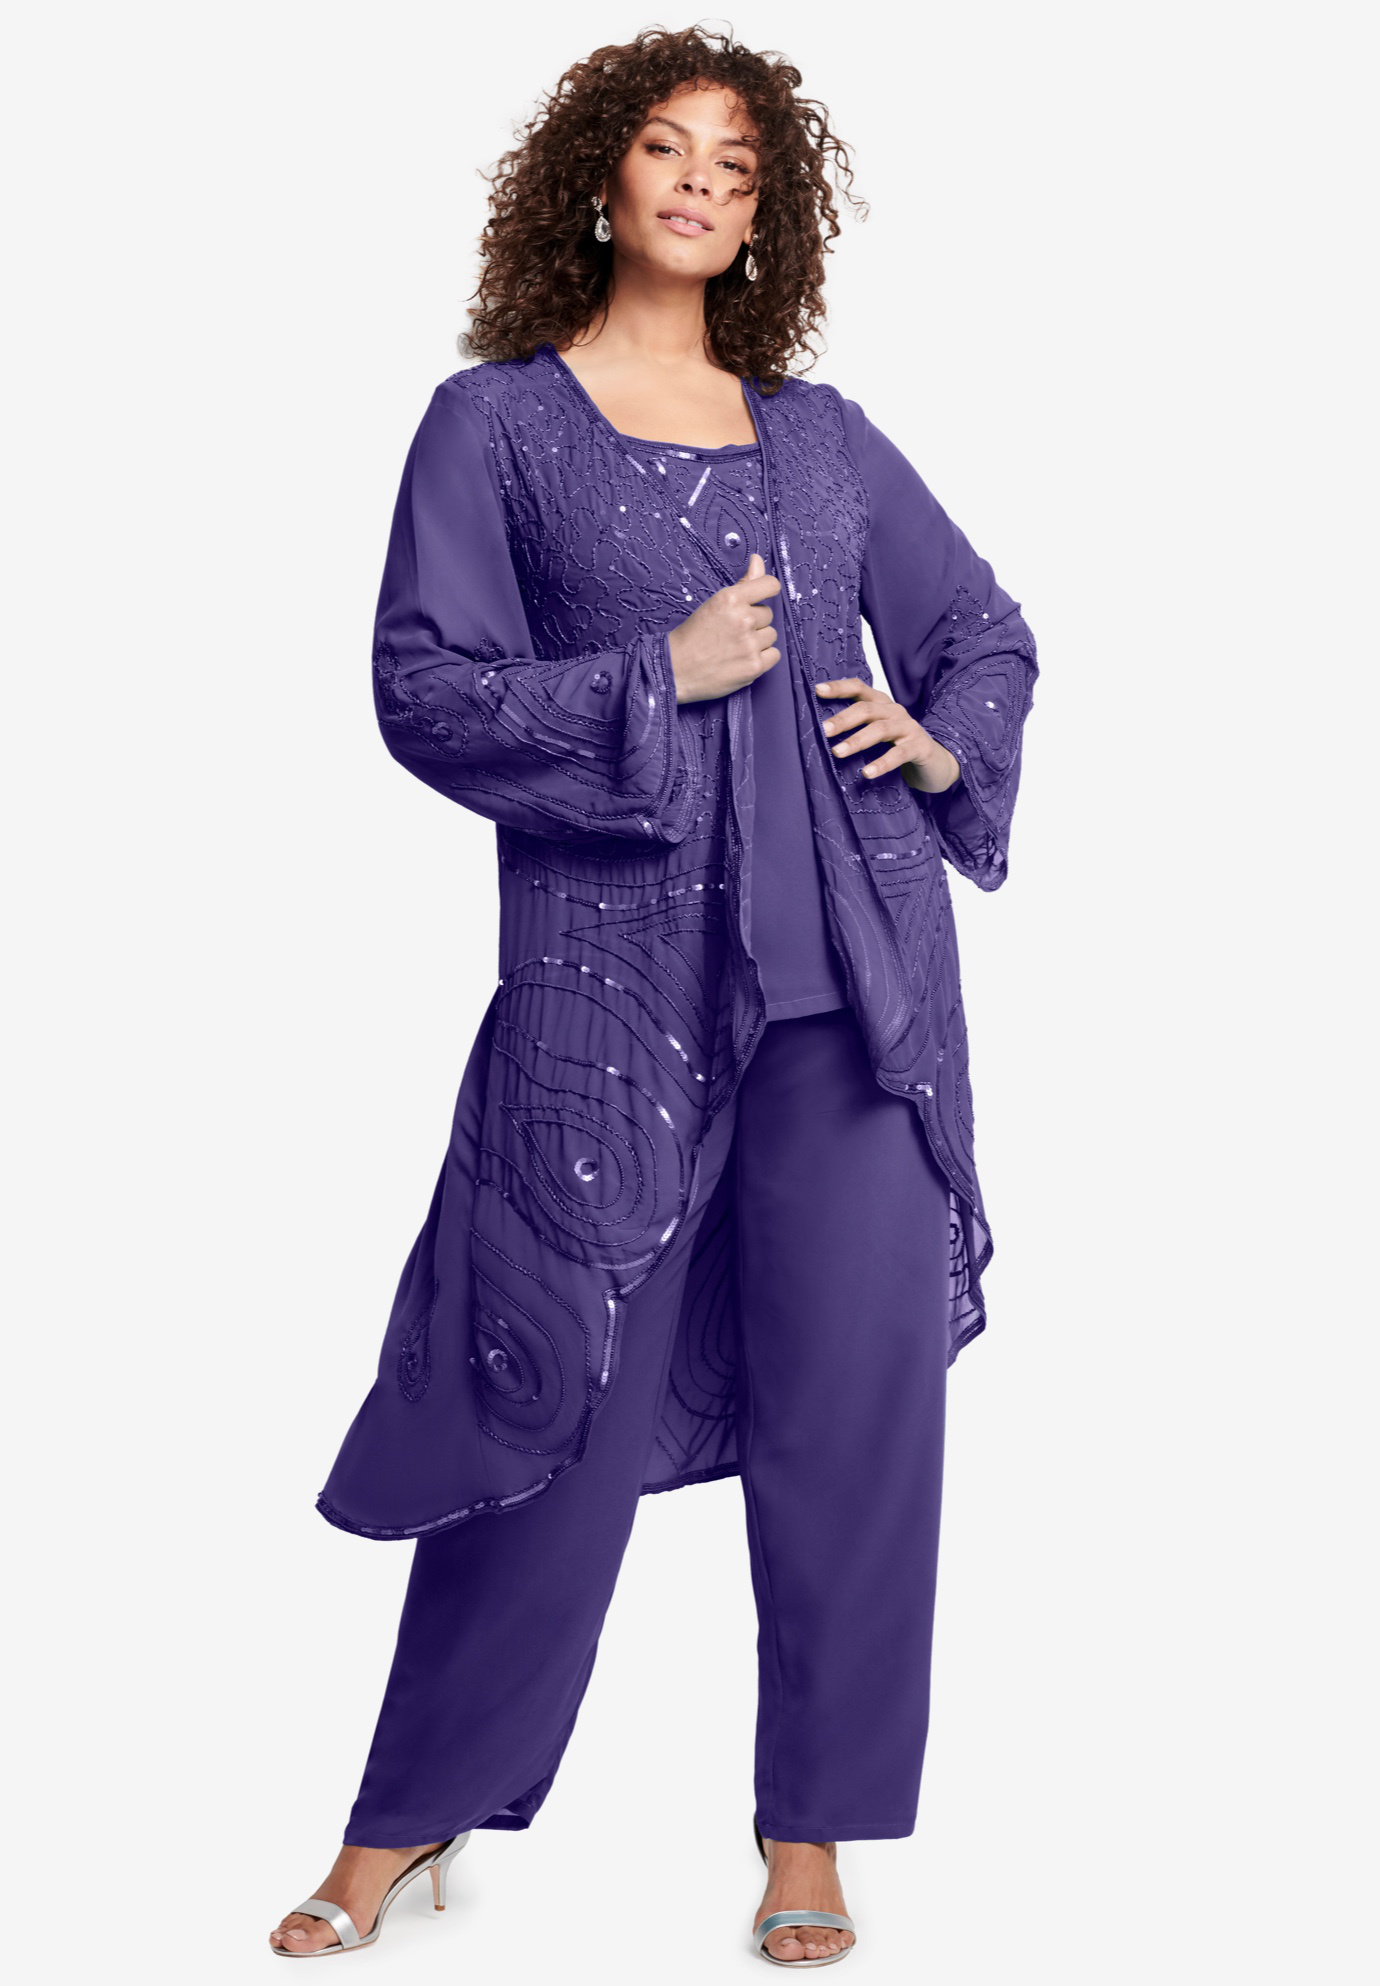 Plus Size Women's 3-Piece Lace Gala Pant Suit by Catherines in Heirloom  Lilac (Size 18 W) - Yahoo Shopping